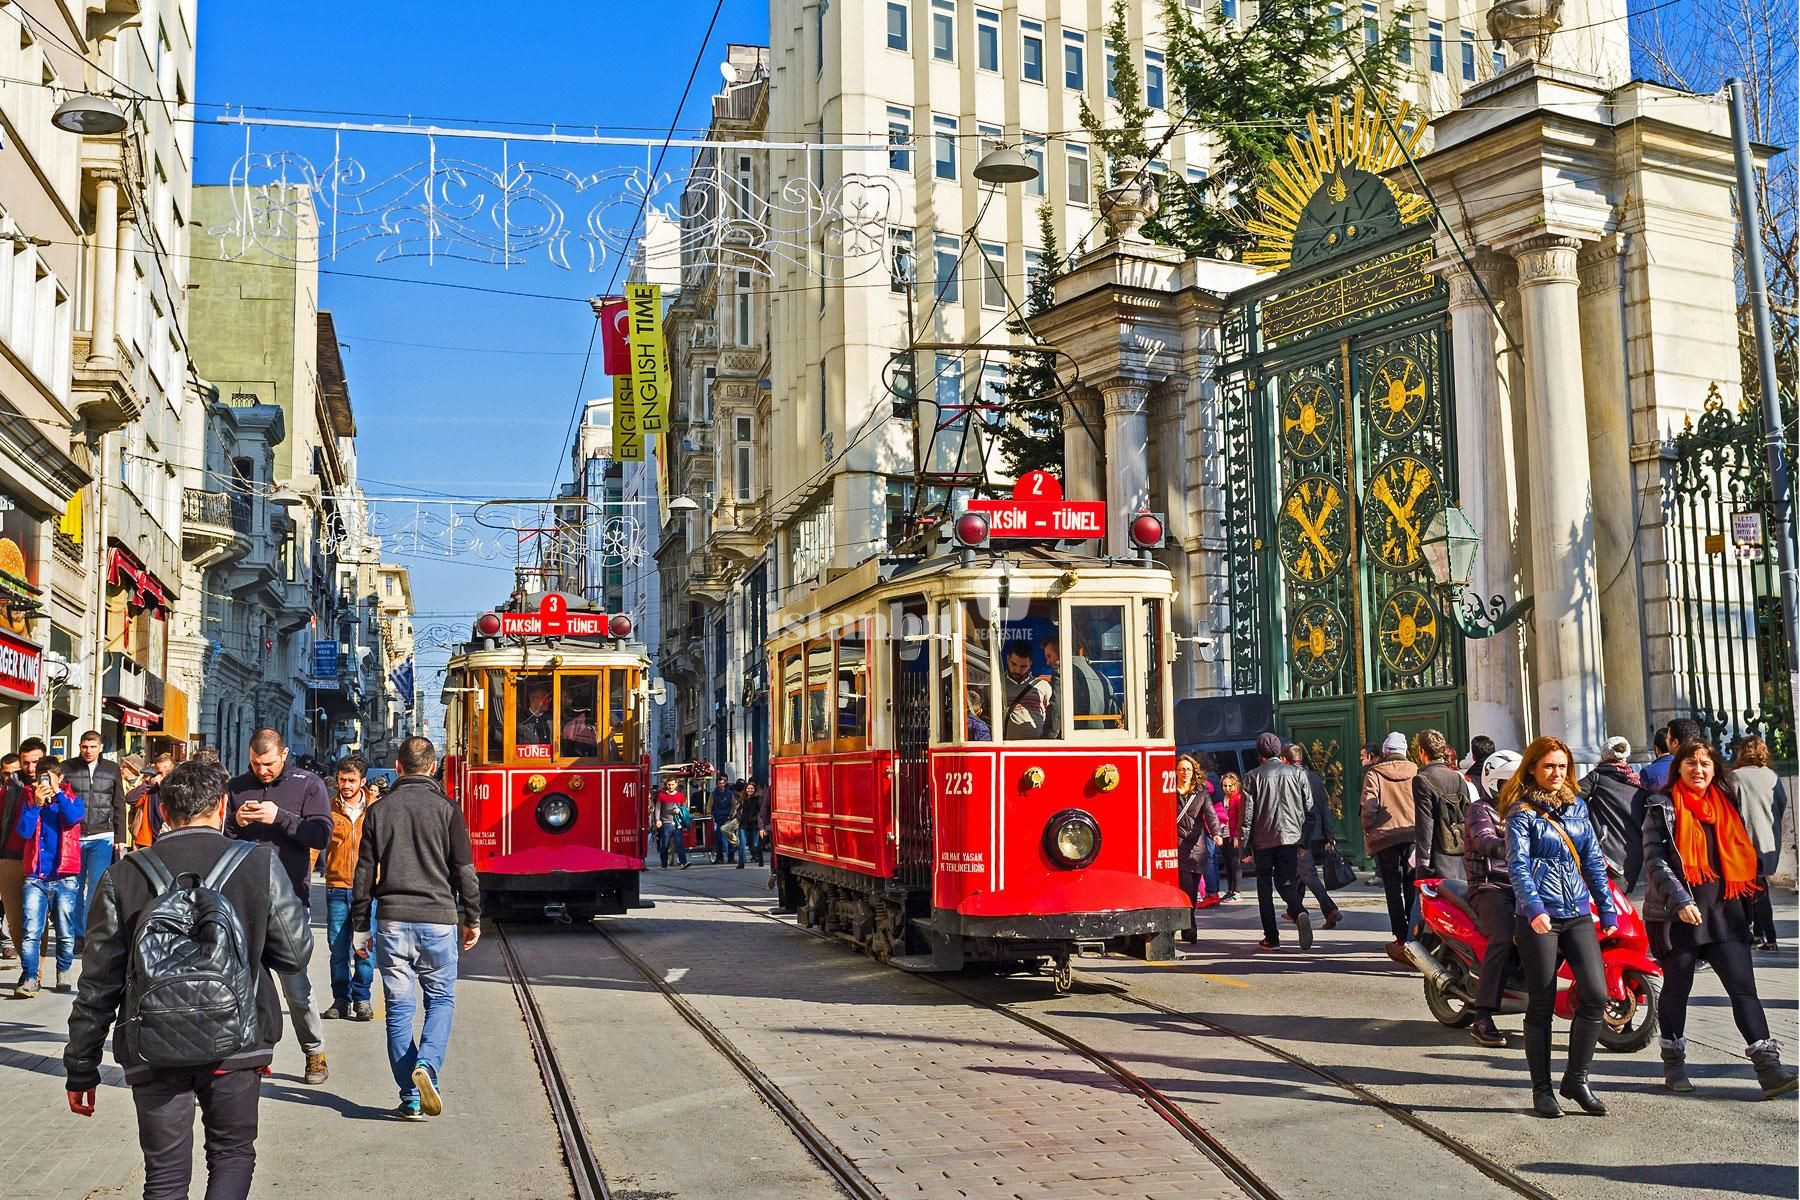 Beyoglu - The Heart of Culture and Tourism